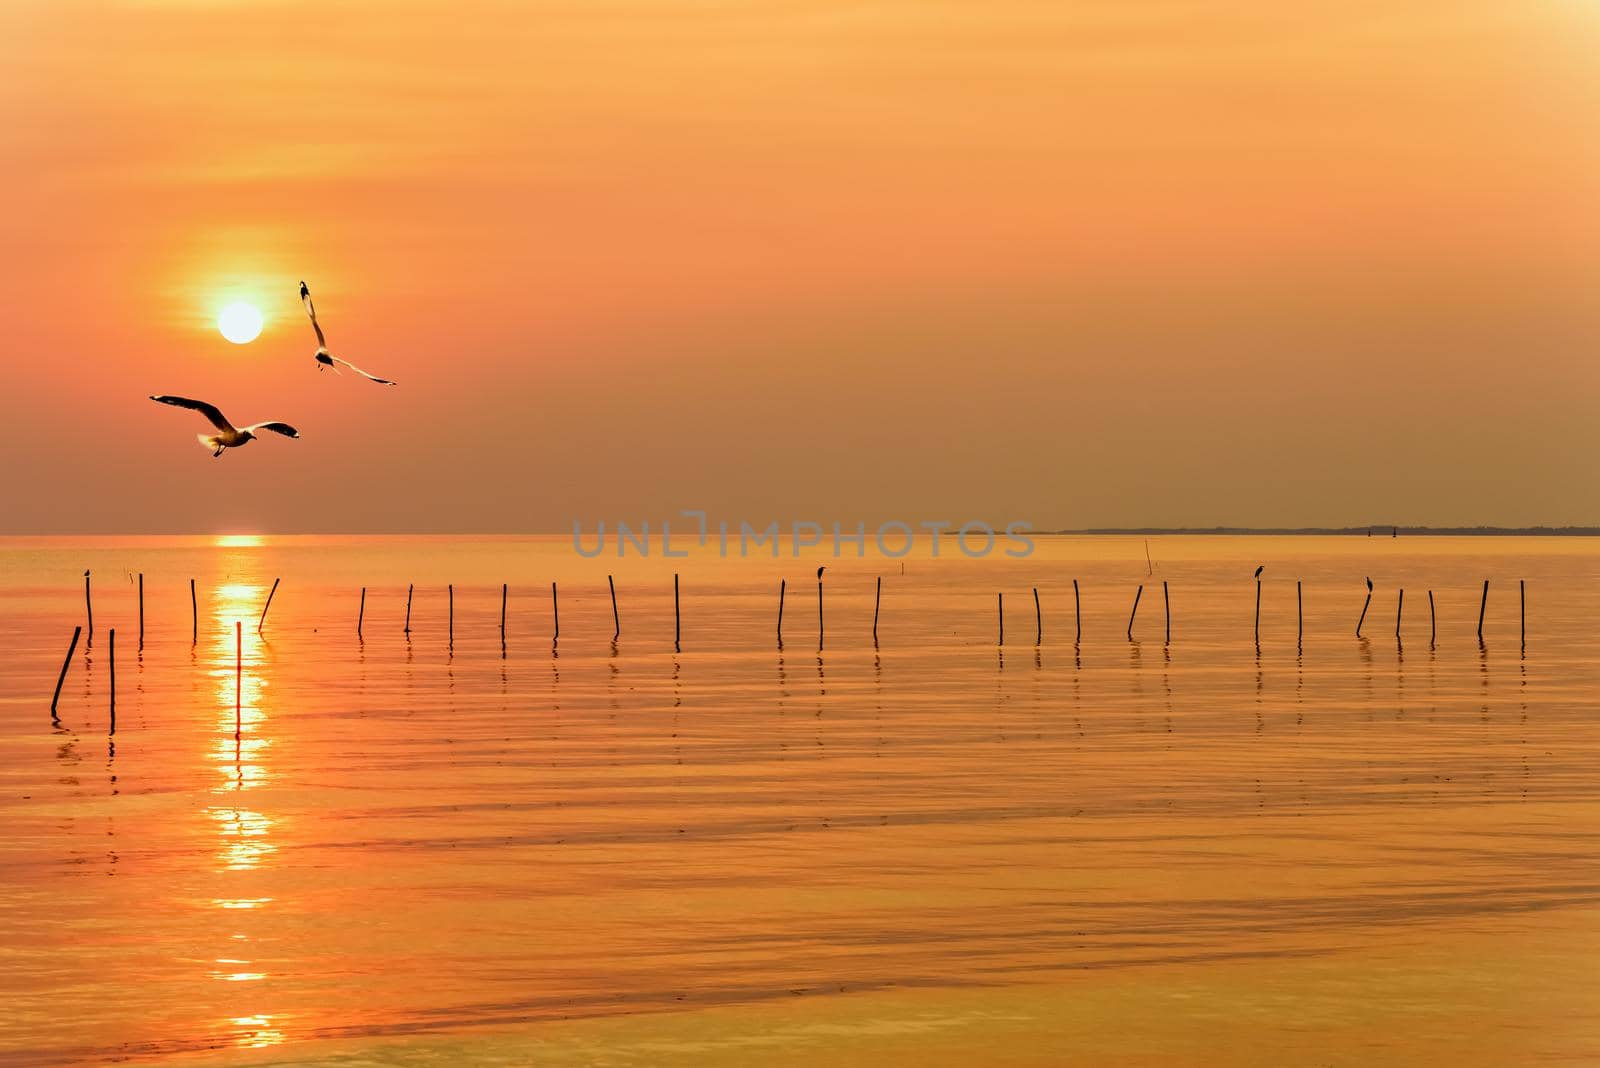 Pair of seagulls in yellow, orange sky and bright sun at sunrise, Happy animal in beautiful nature landscape for background, Two birds flying above the sea, water and horizon ocean at sunset, Thailand